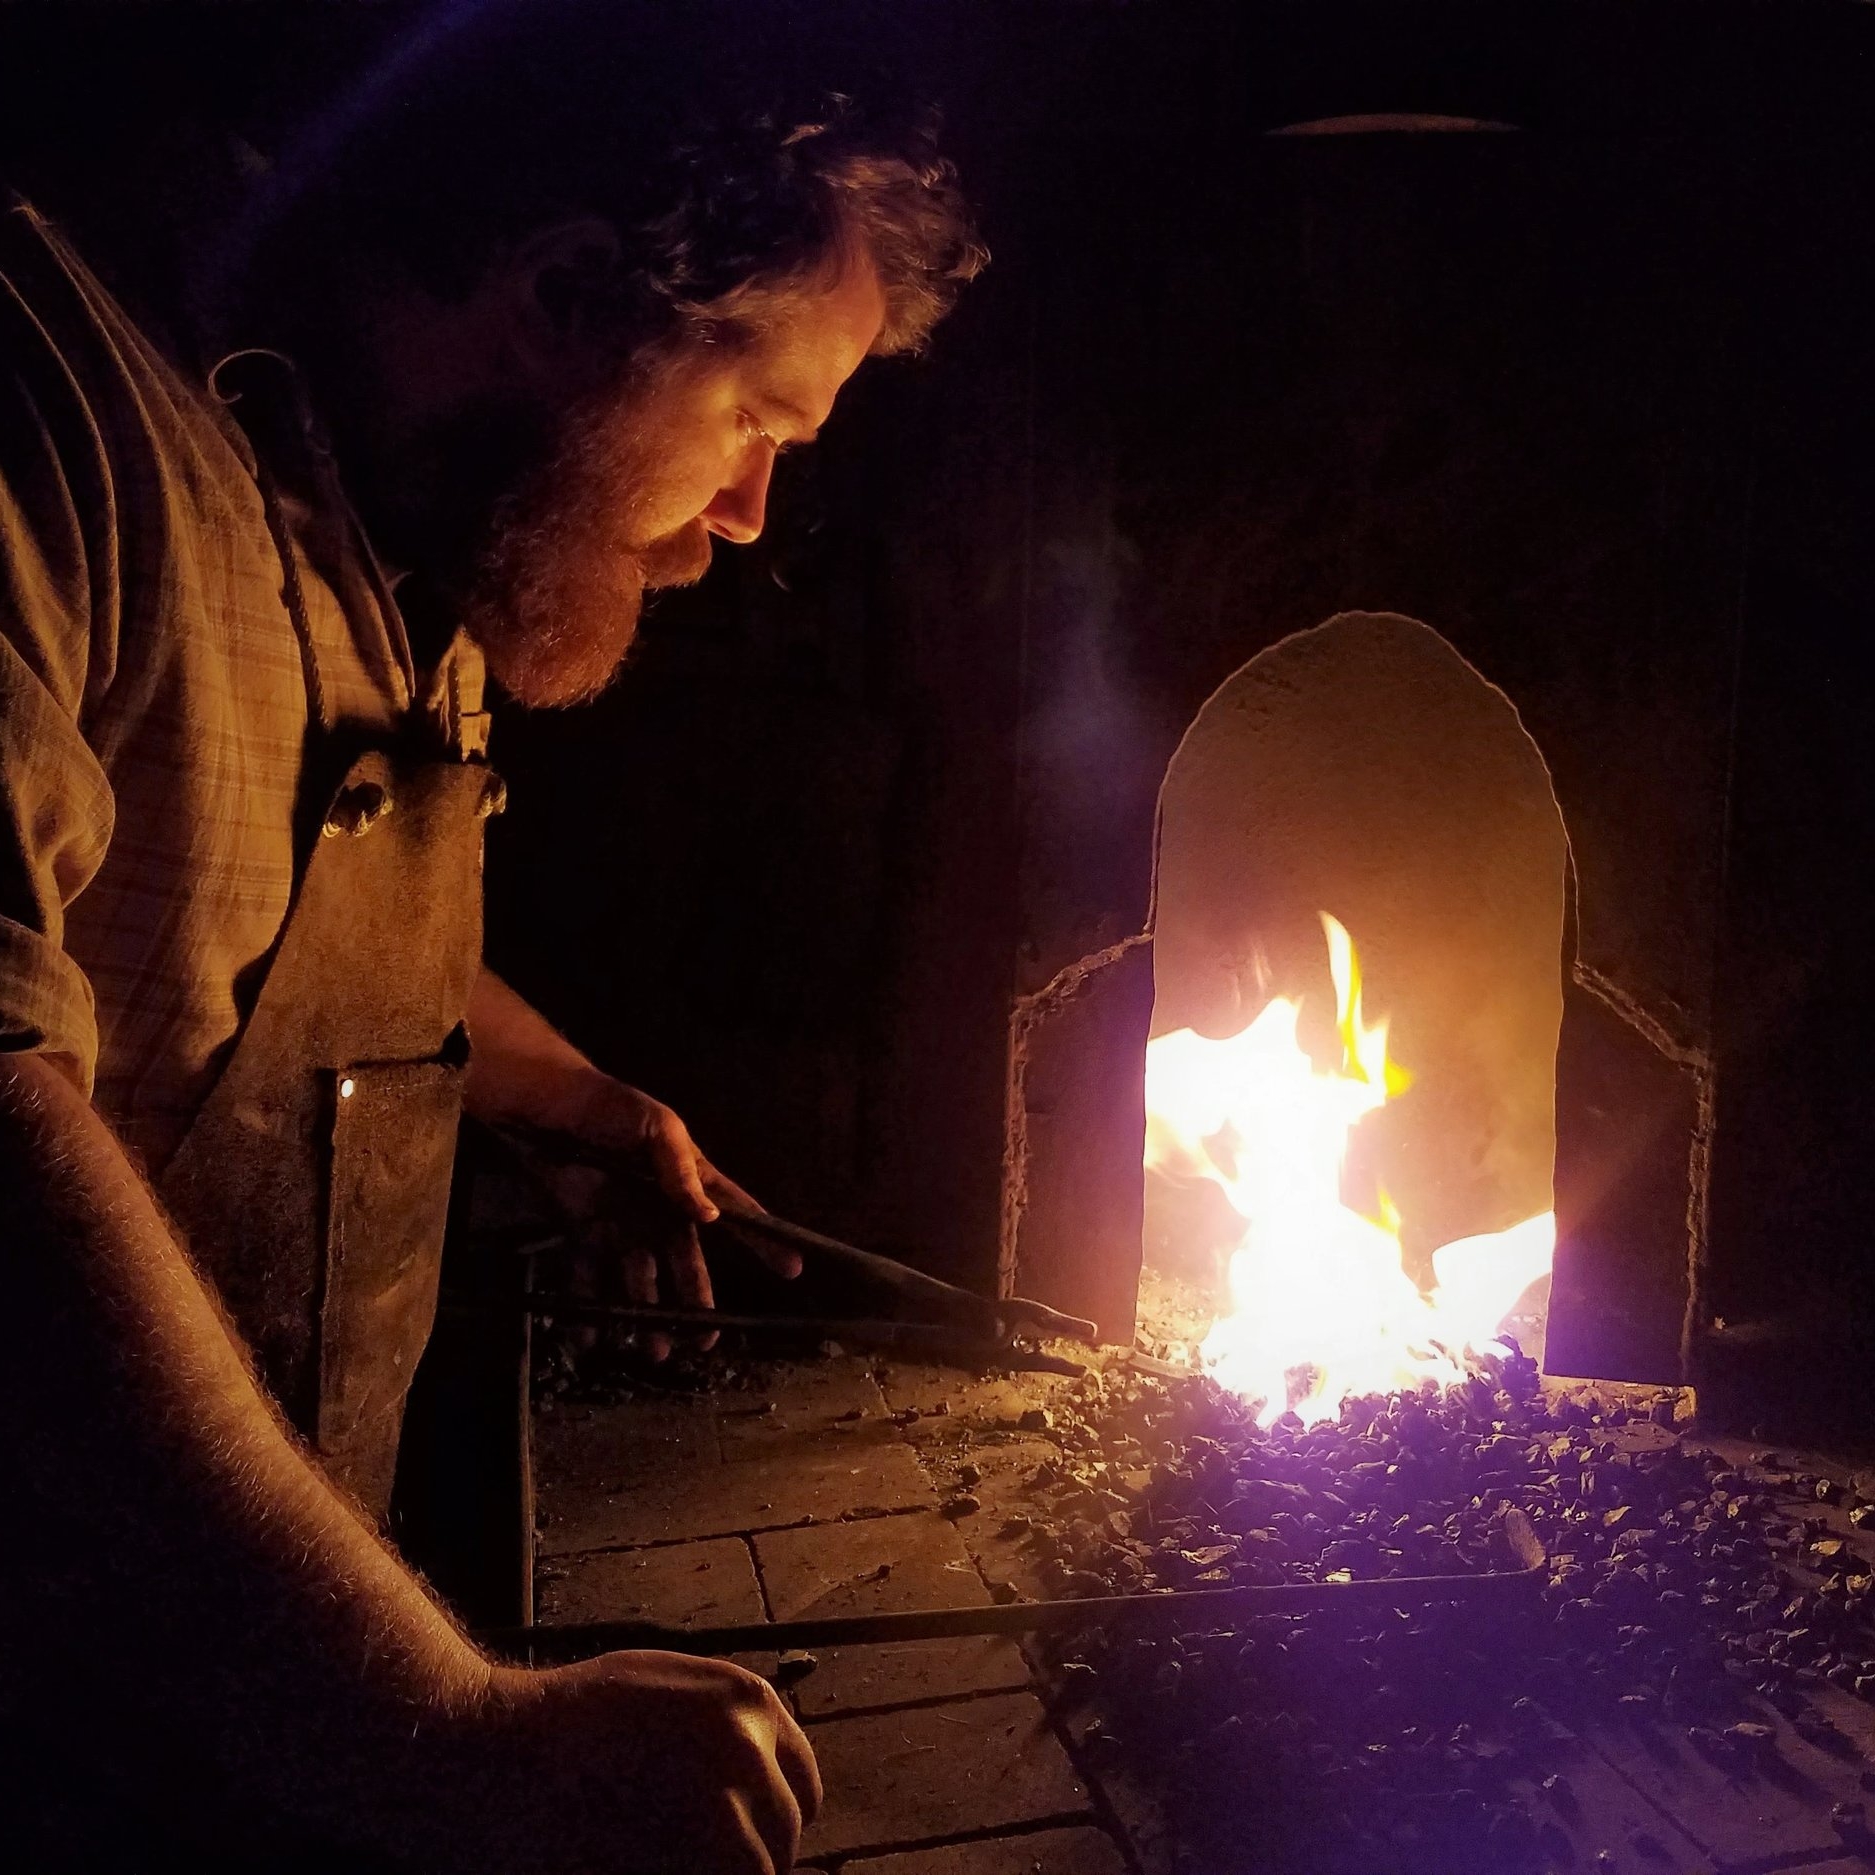 Olof at the forge